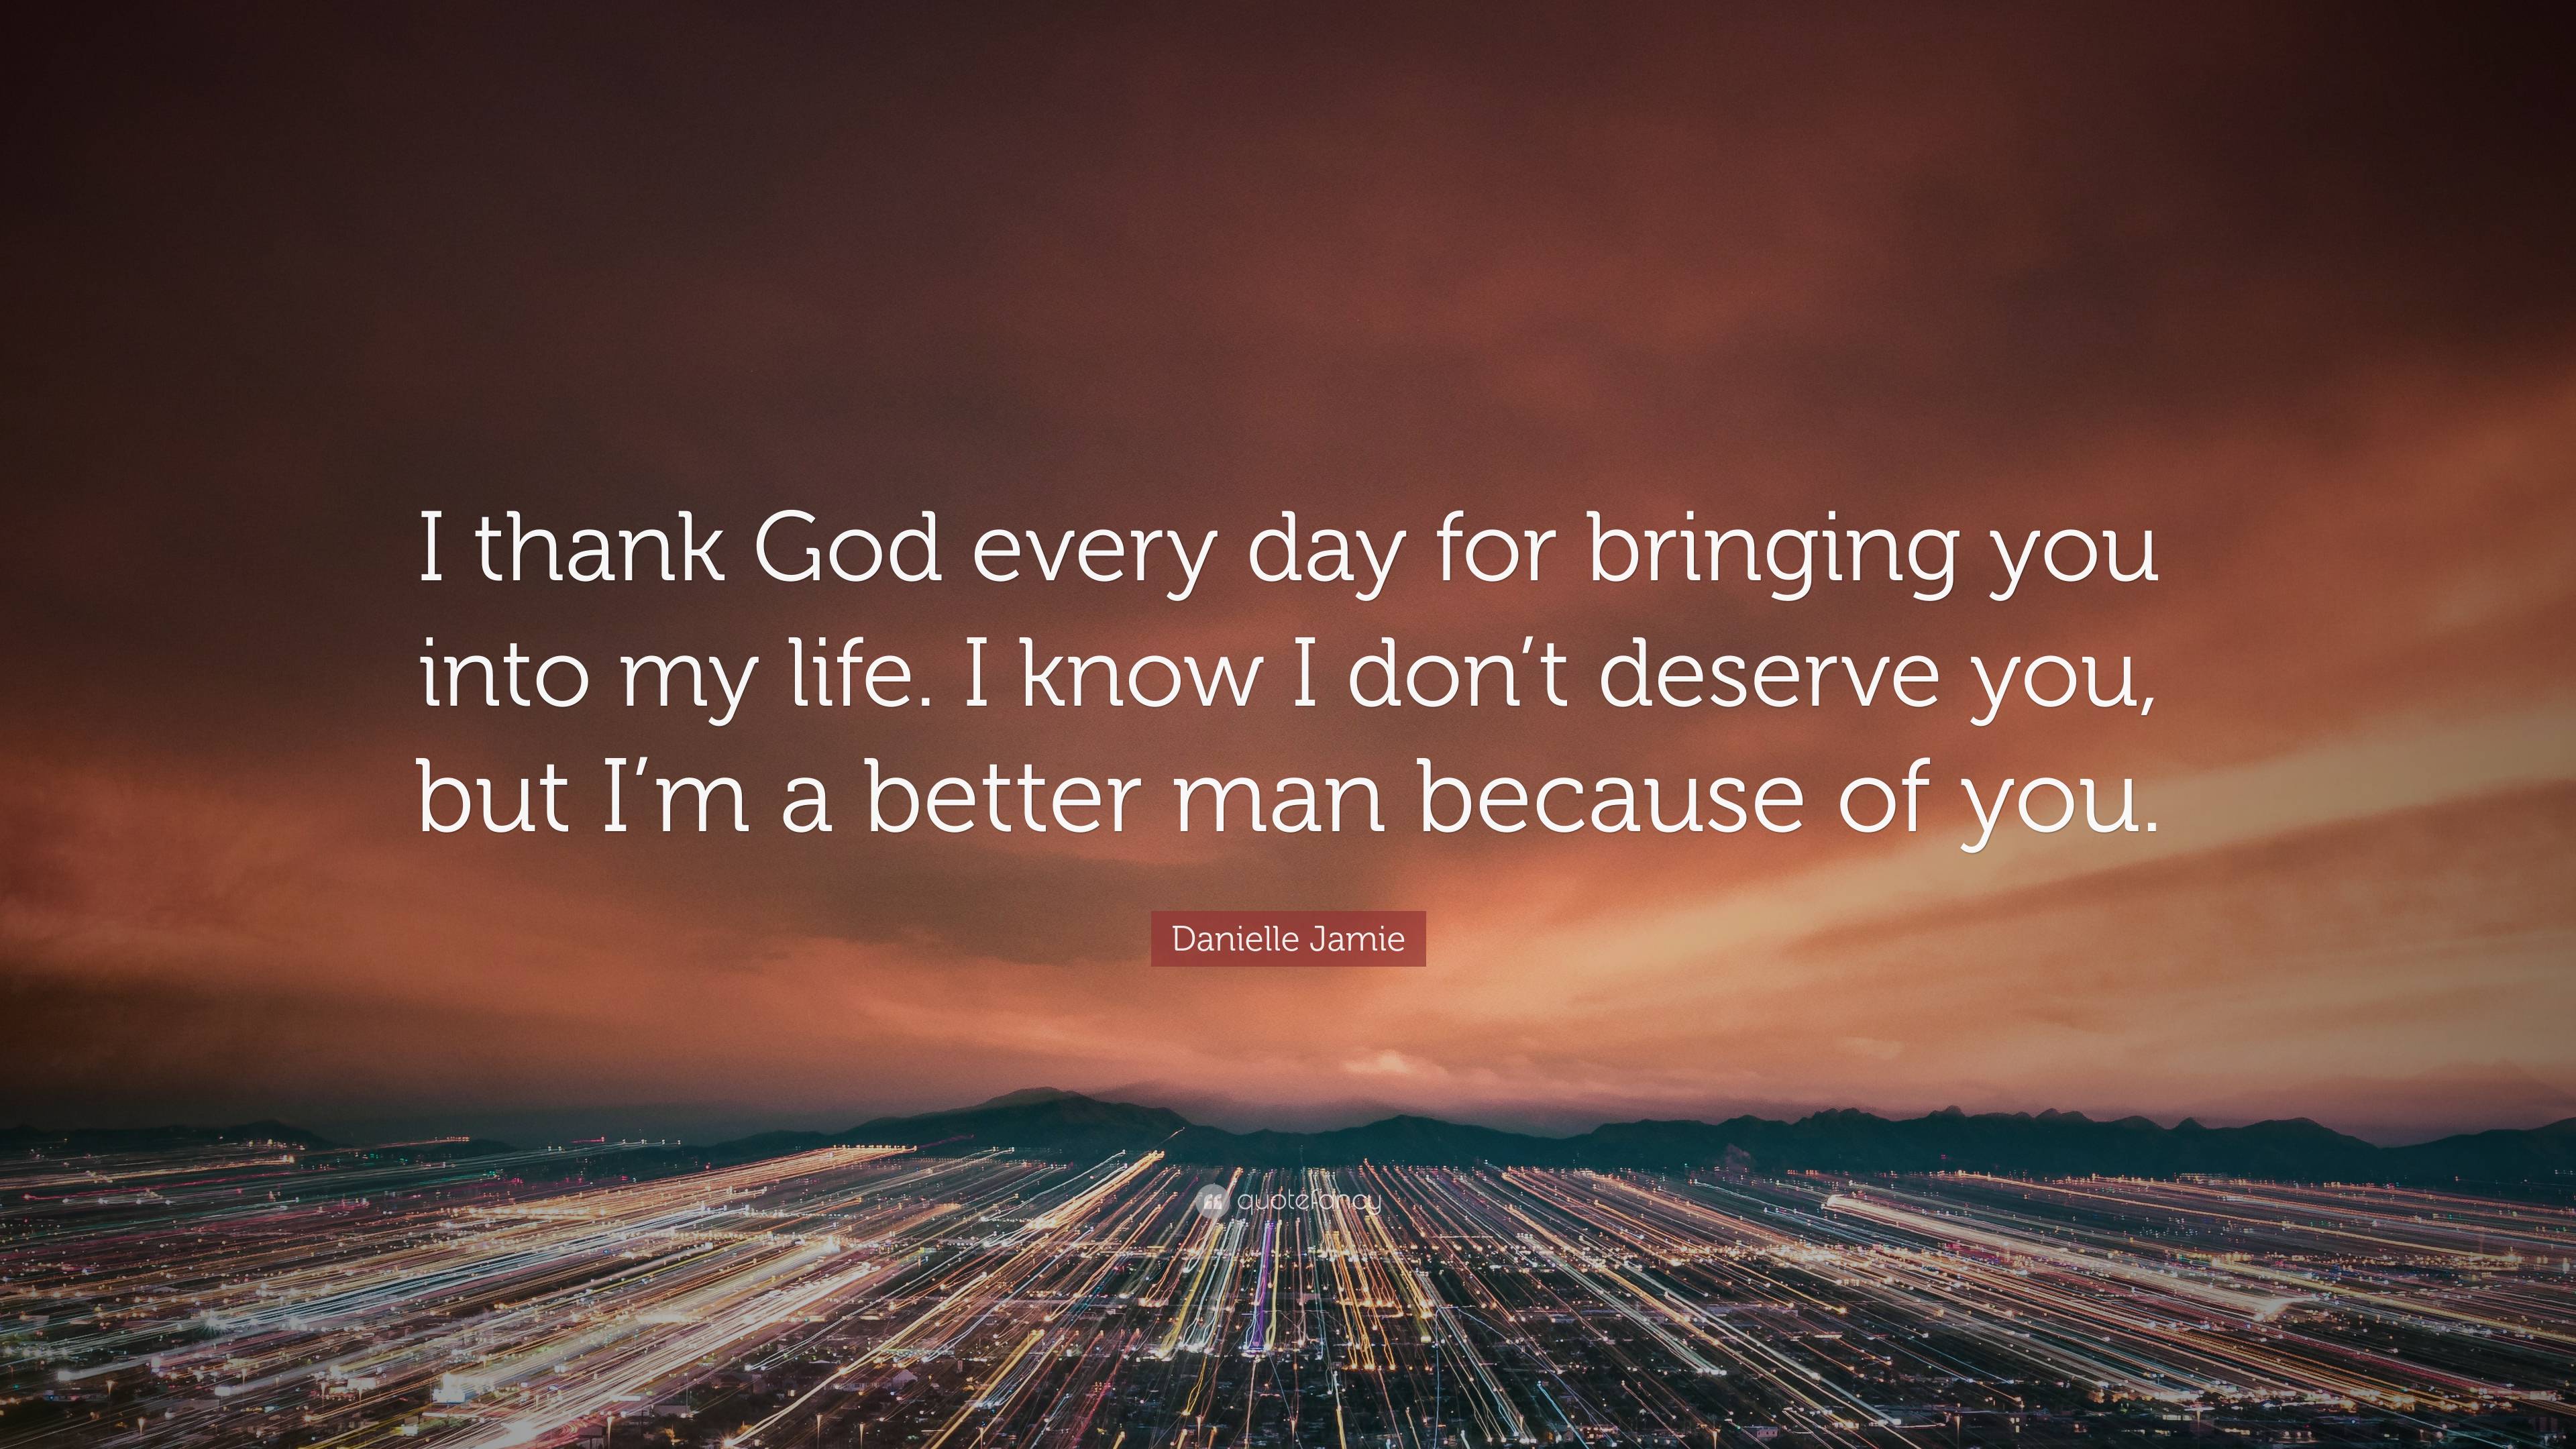 https://quotefancy.com/media/wallpaper/3840x2160/7451674-Danielle-Jamie-Quote-I-thank-God-every-day-for-bringing-you-into.jpg